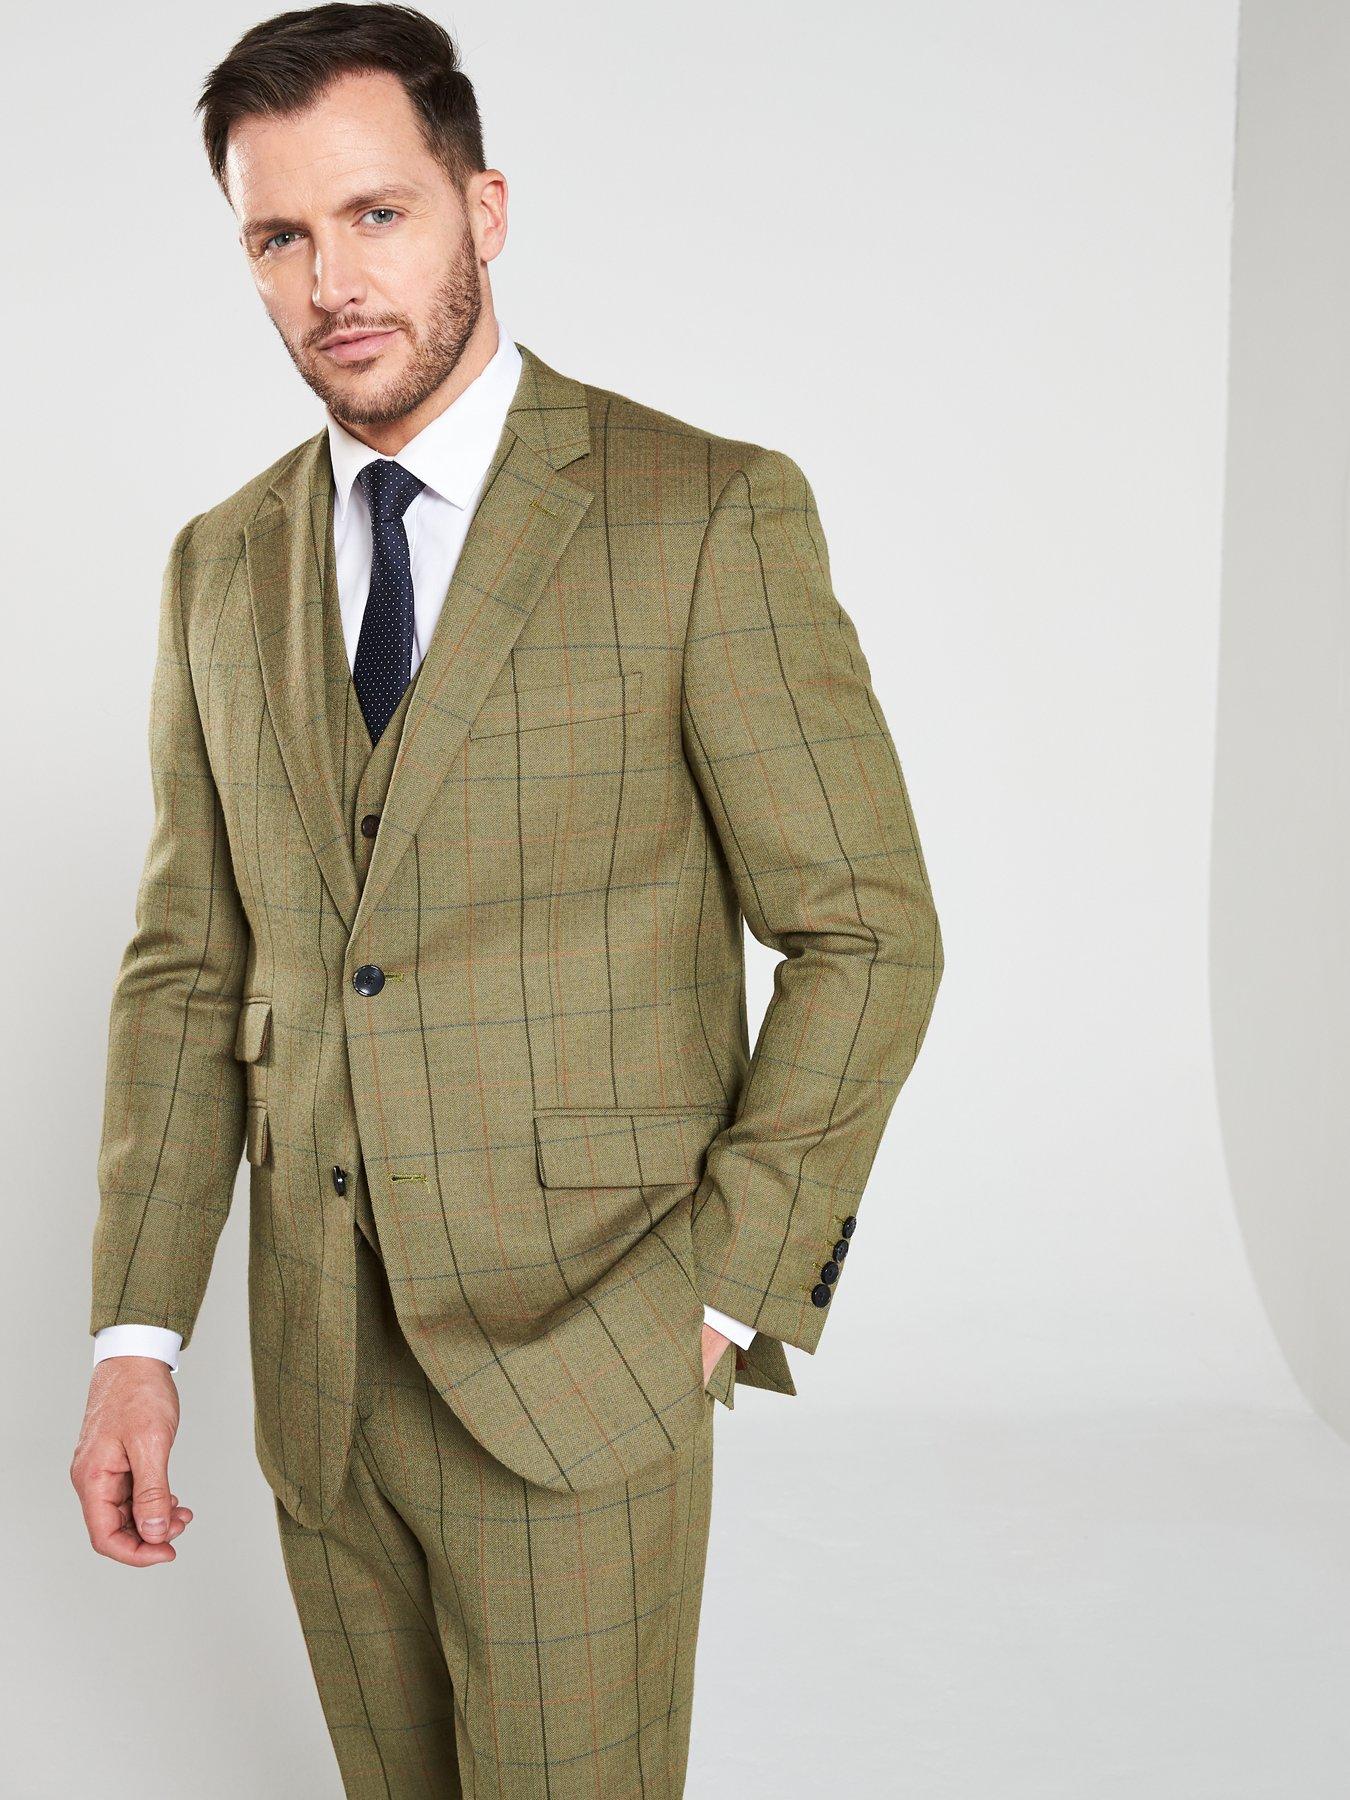 Details about   SKOPES Mens Big Size Suit Trousers in Lovat Check Morfe